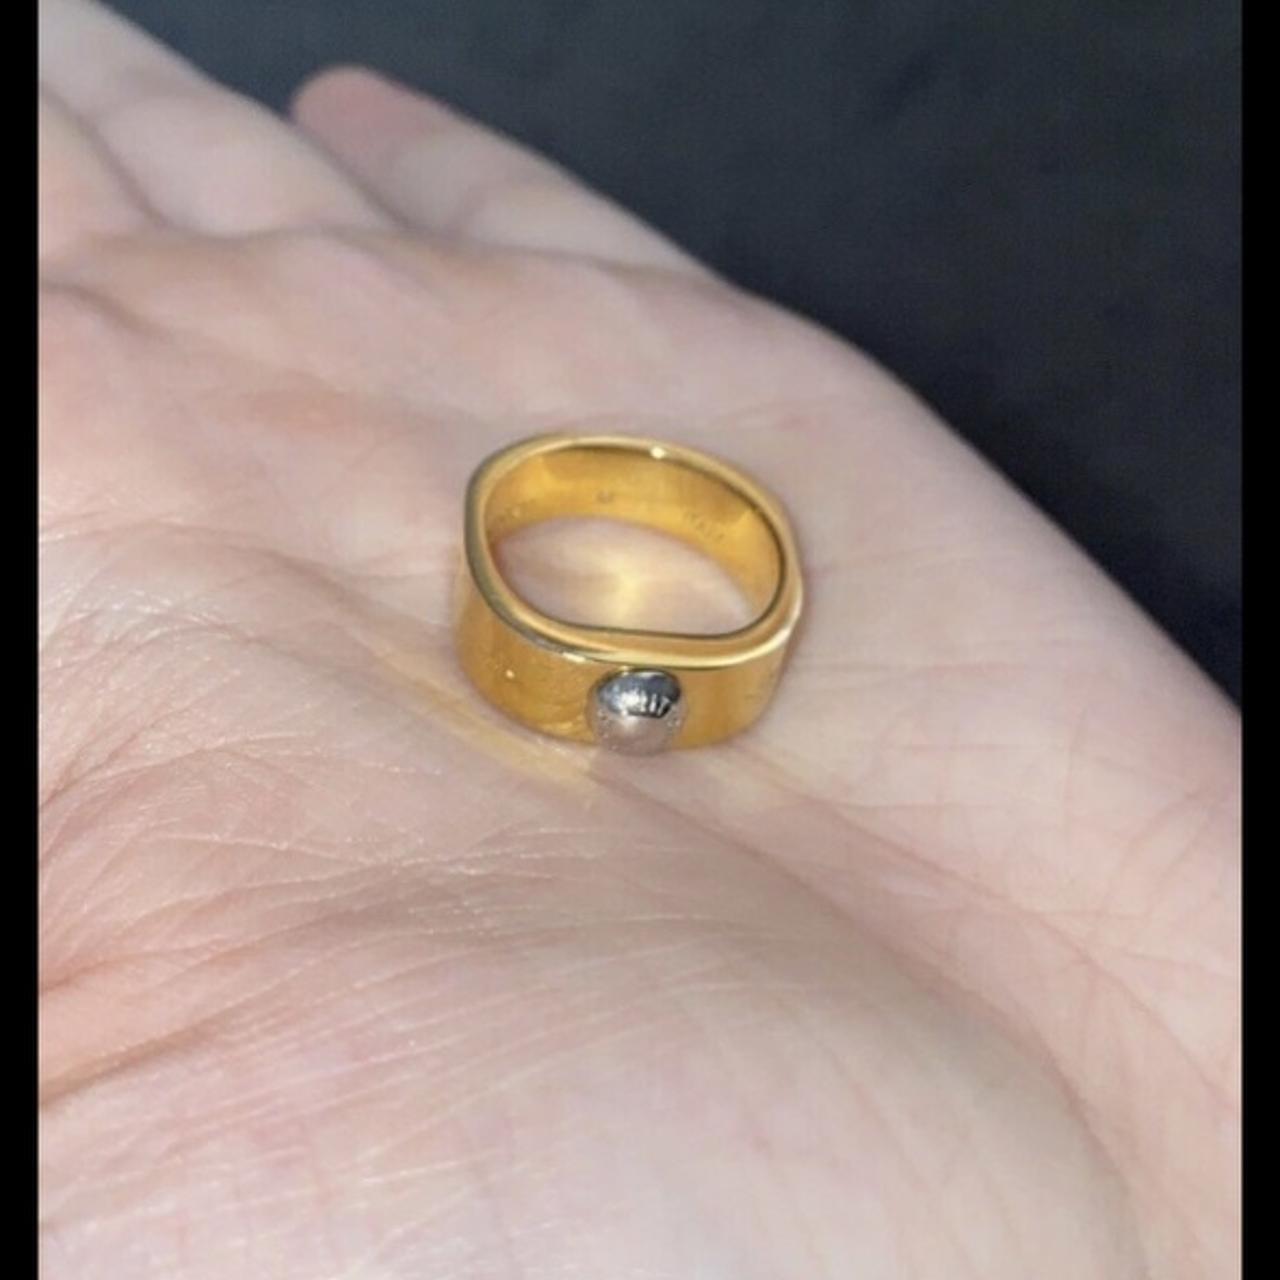 Nanogram Louis Vuitton ring size S my ring size is a - Depop